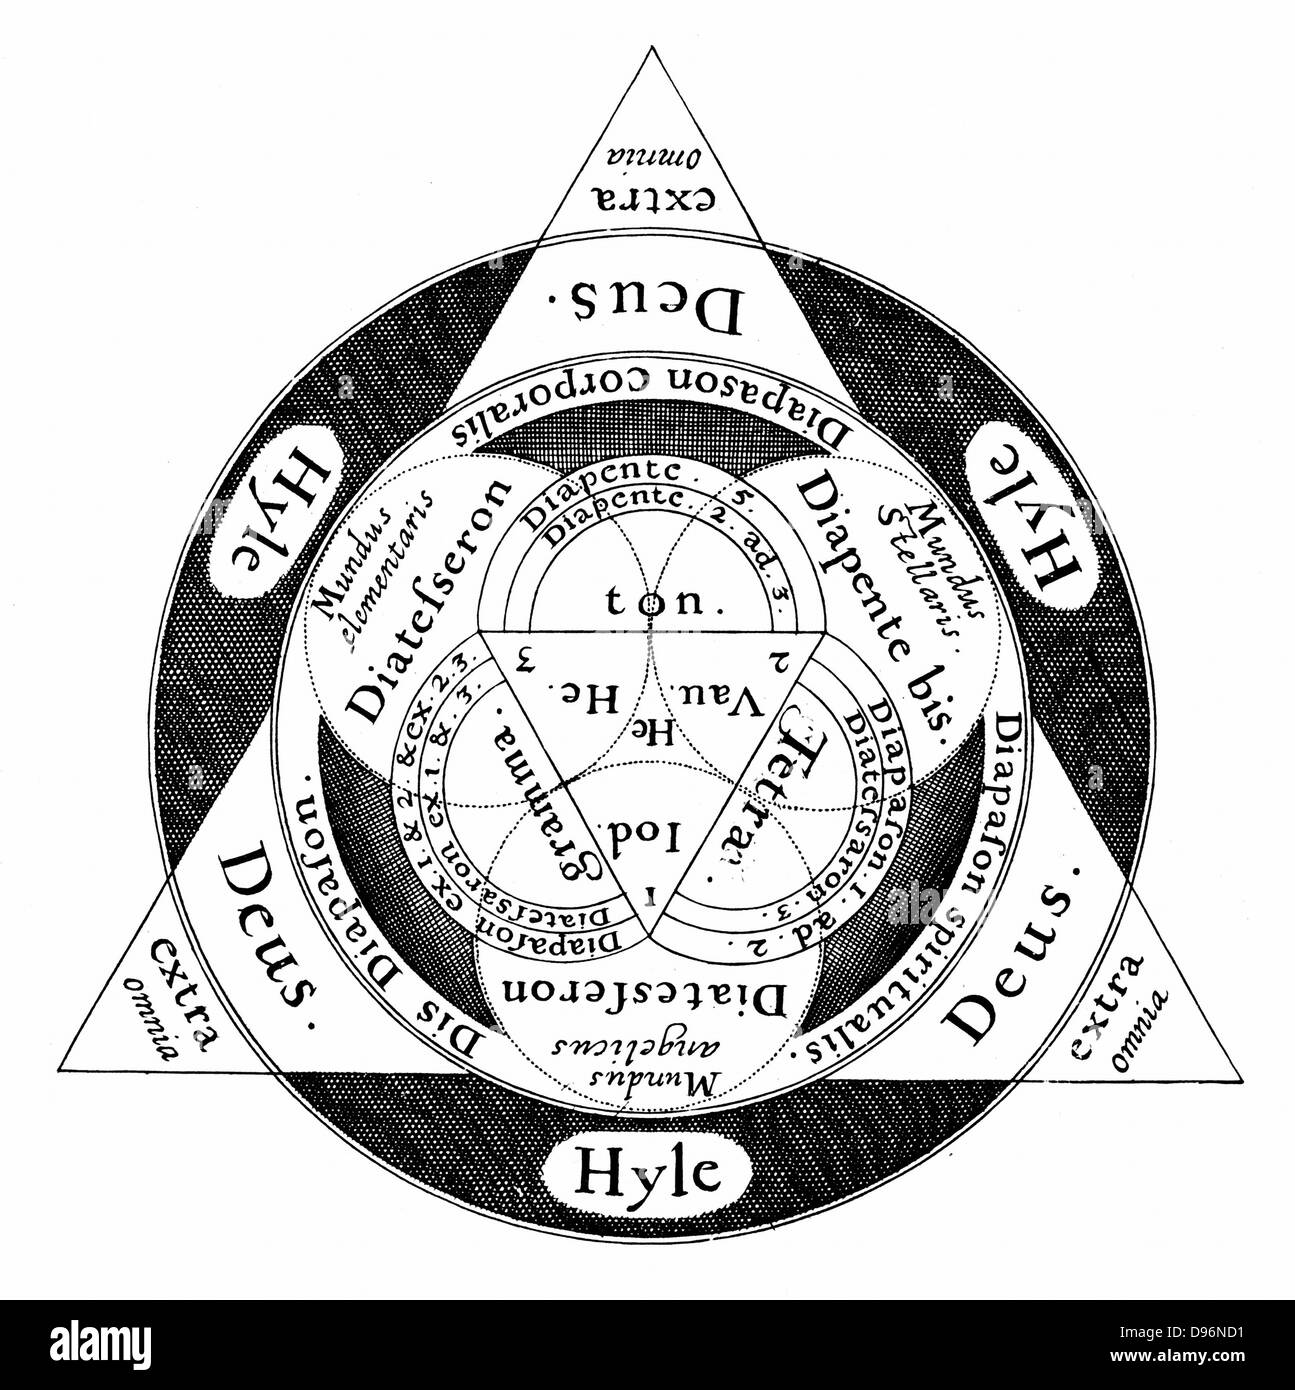 The divine harmony of the microcosm and the macrososm according to the Hermetic and Cabalistic teaching. God is always at the apex of the triangle. From Robert Fludd 'Ultriusque cosmi... historia', Oppenheim, 1617-1619. Engraving Stock Photo